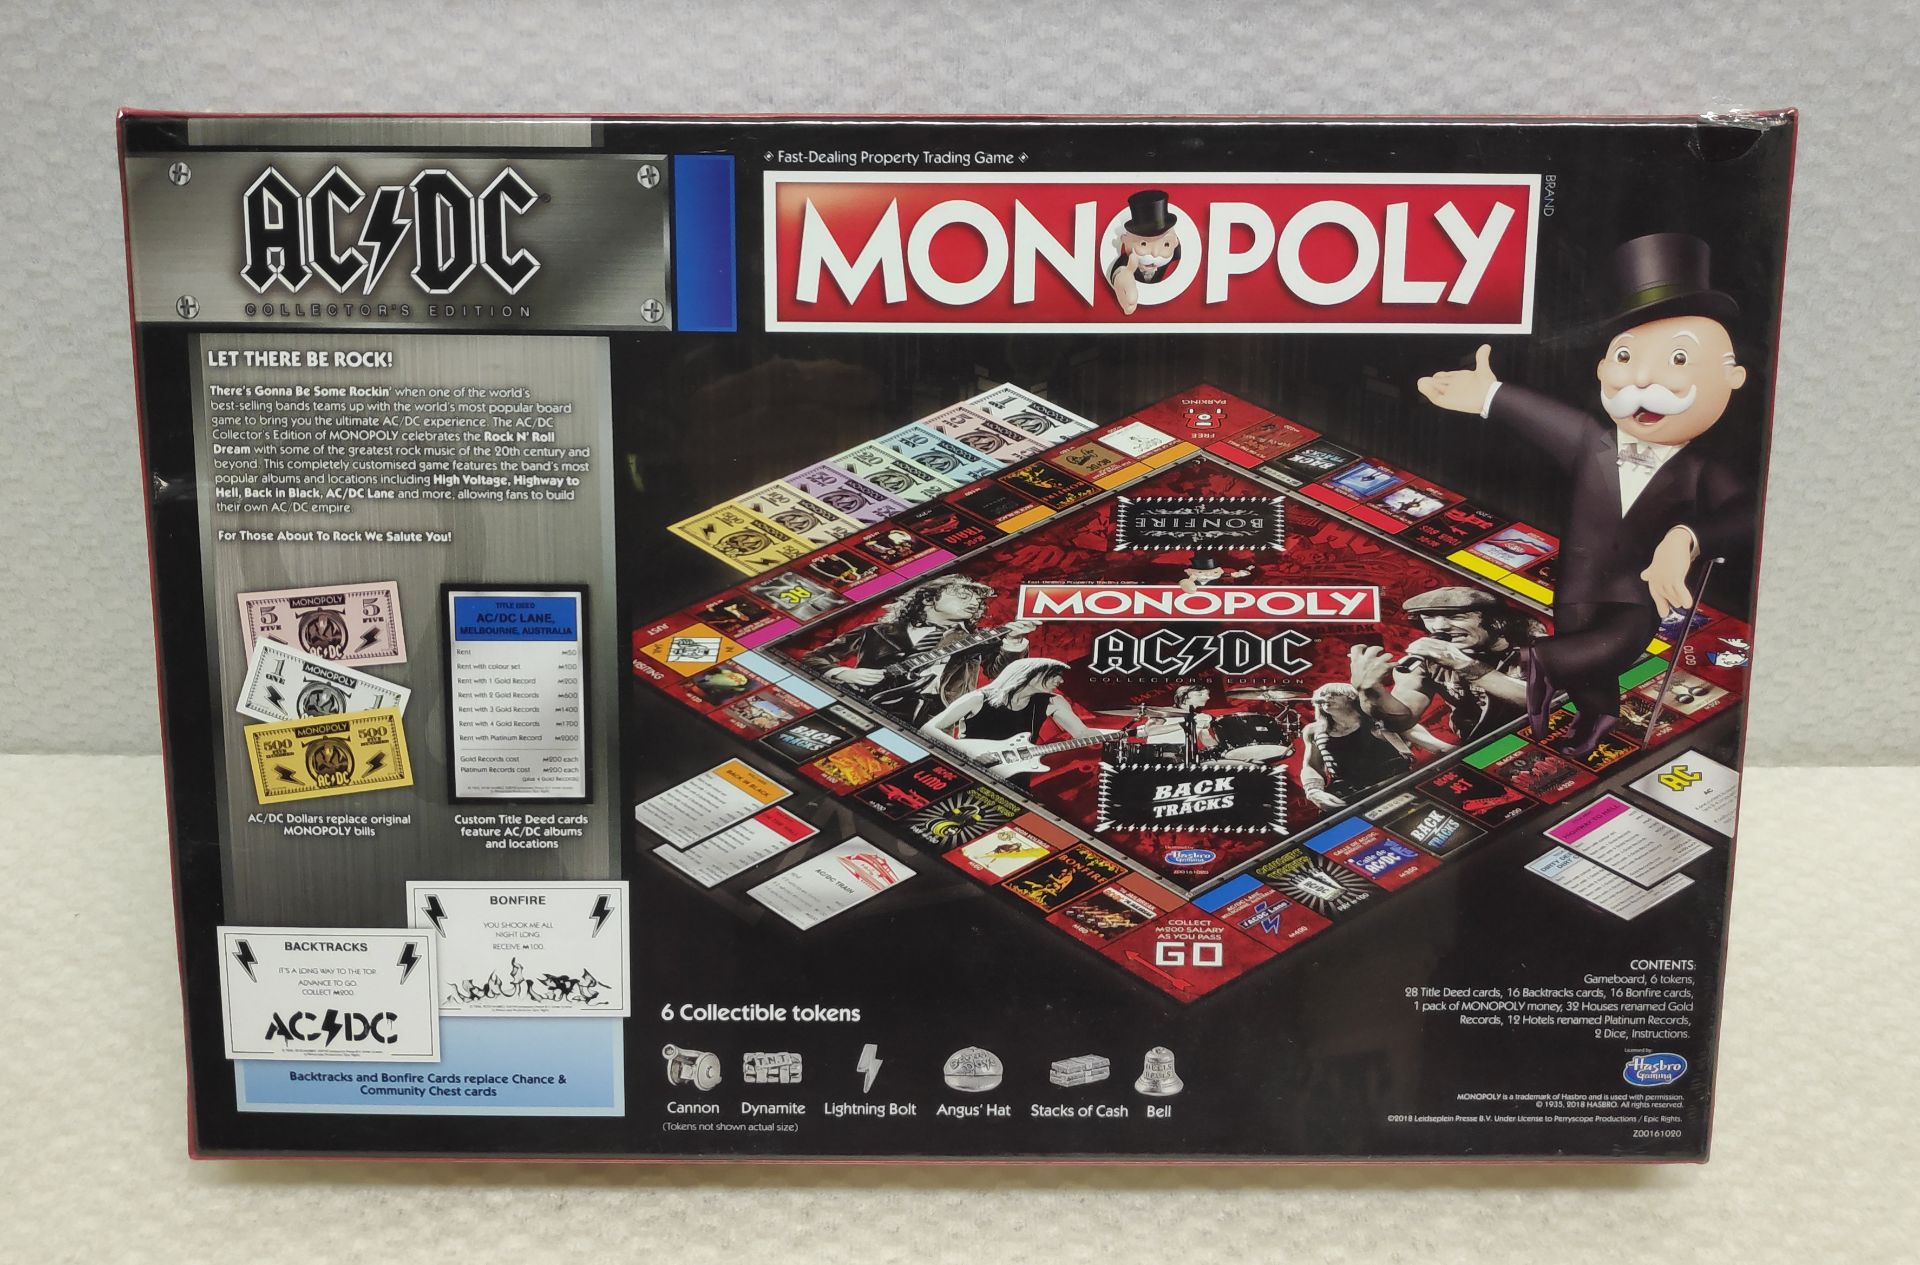 1 x AC/DC Collector's Edition Monopoly - New/Sealed - HTYS169 - CL720 - Location: Altrincham WA14<BR - Image 2 of 8